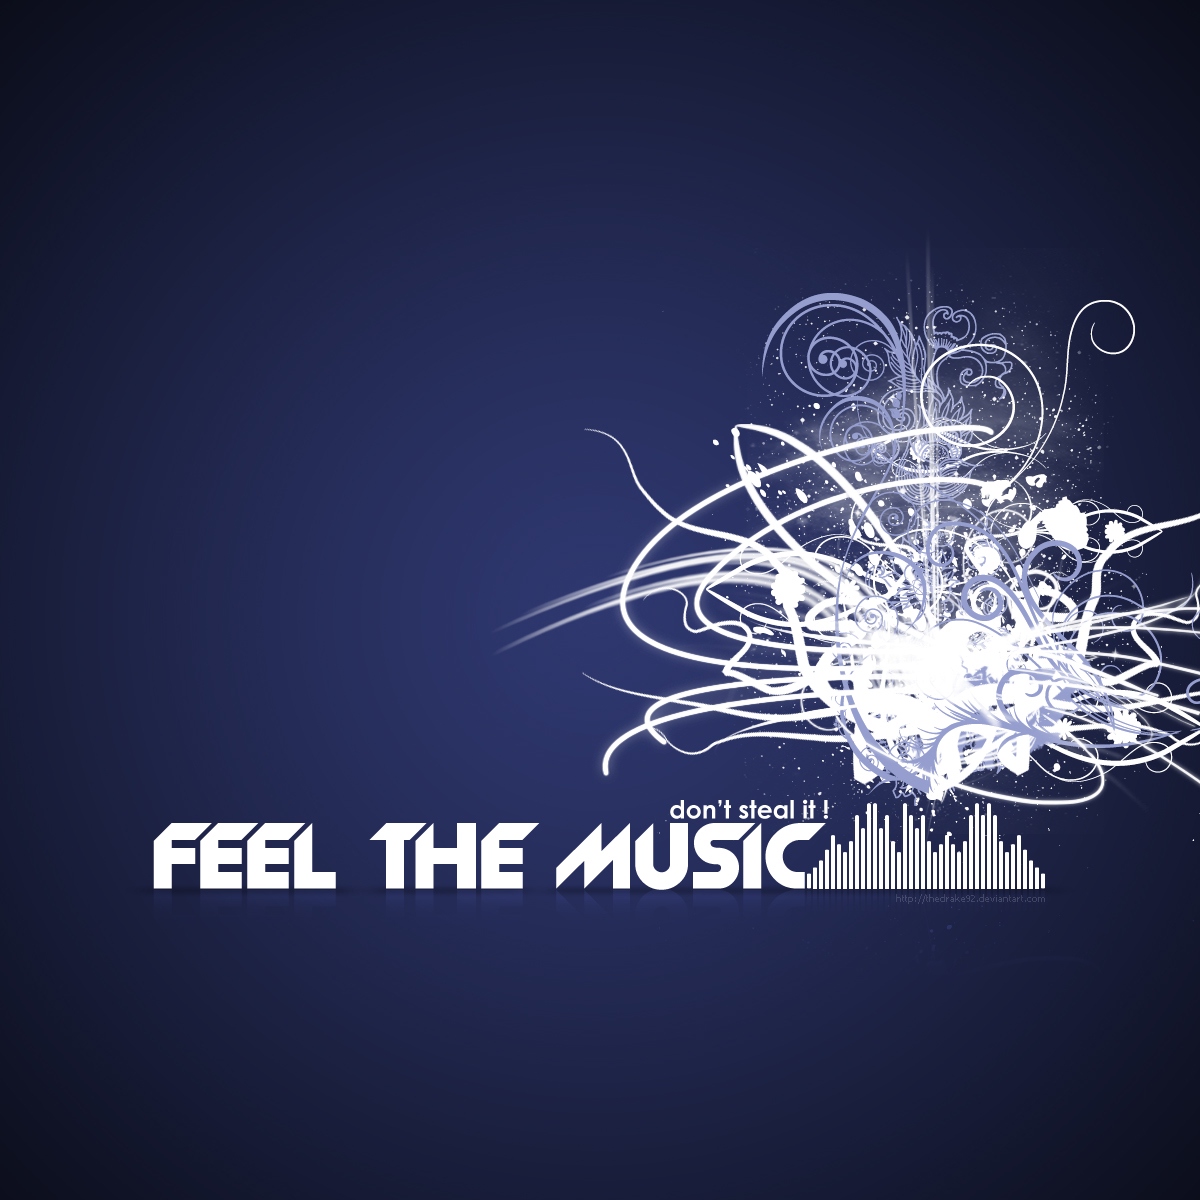 Feel the Music. Feat это в Музыке. Featuring Music.